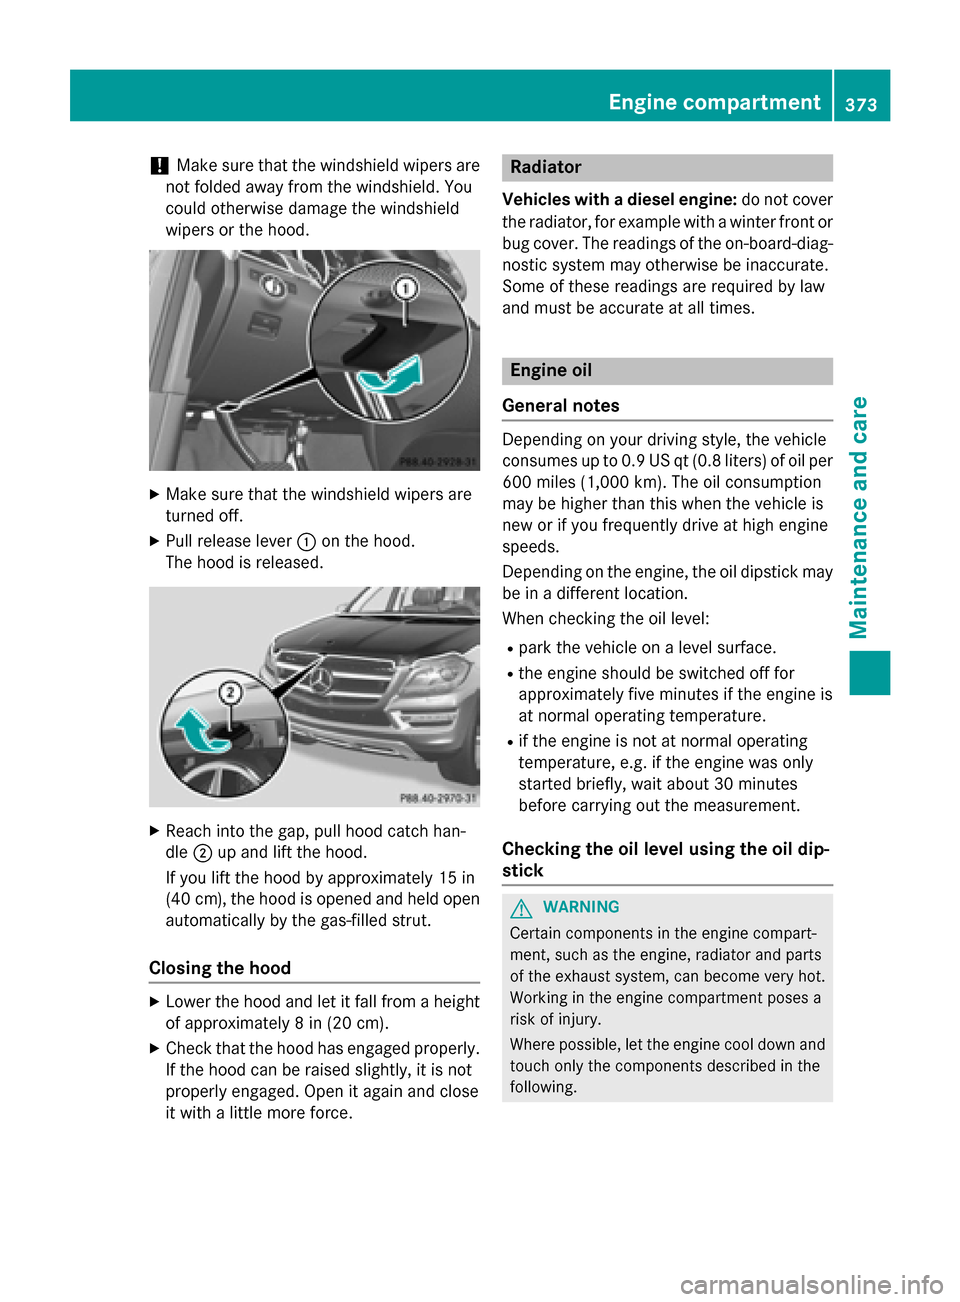 MERCEDES-BENZ GL-Class 2015 X166 Owners Manual !
Make sure that the windshield wipers are
not folded away from the windshield. You
could otherwise damage the windshield
wipers or the hood. X
Make sure that the windshield wipers are
turned off.
X P